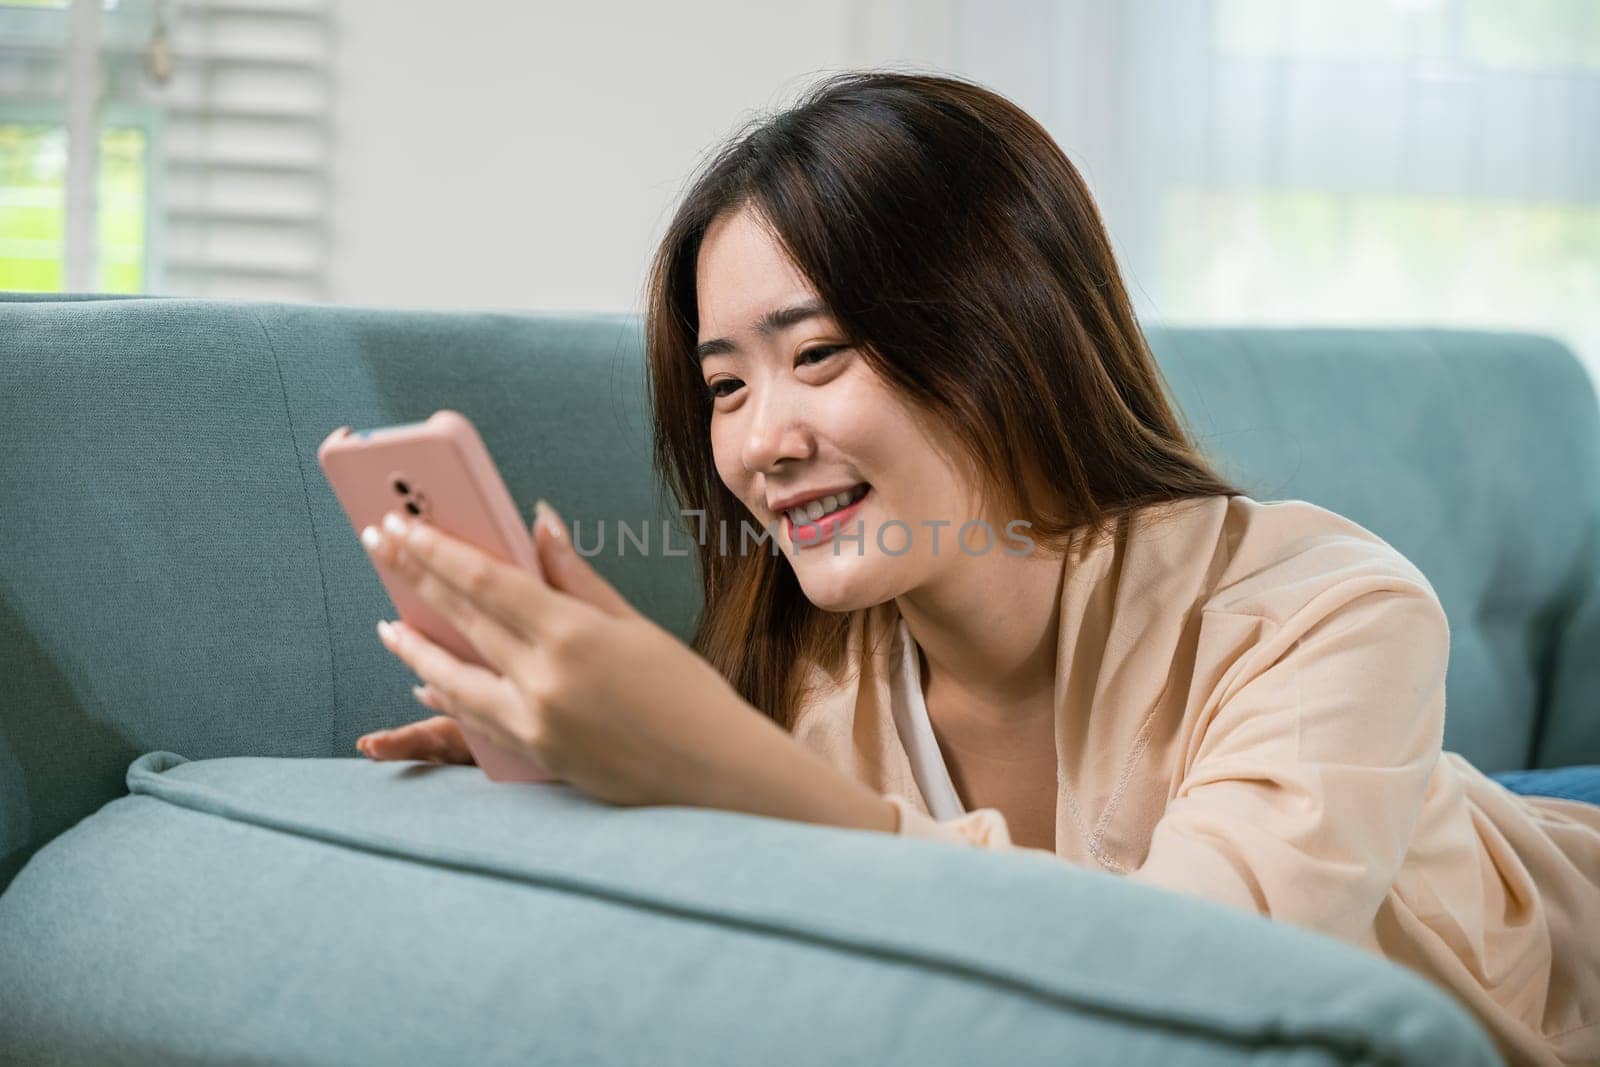 Smiling attractive woman relaxed reading text message on smartphone, Asian young female using smart mobile phone lying on sofa in living room room at home, gadget online application making internet